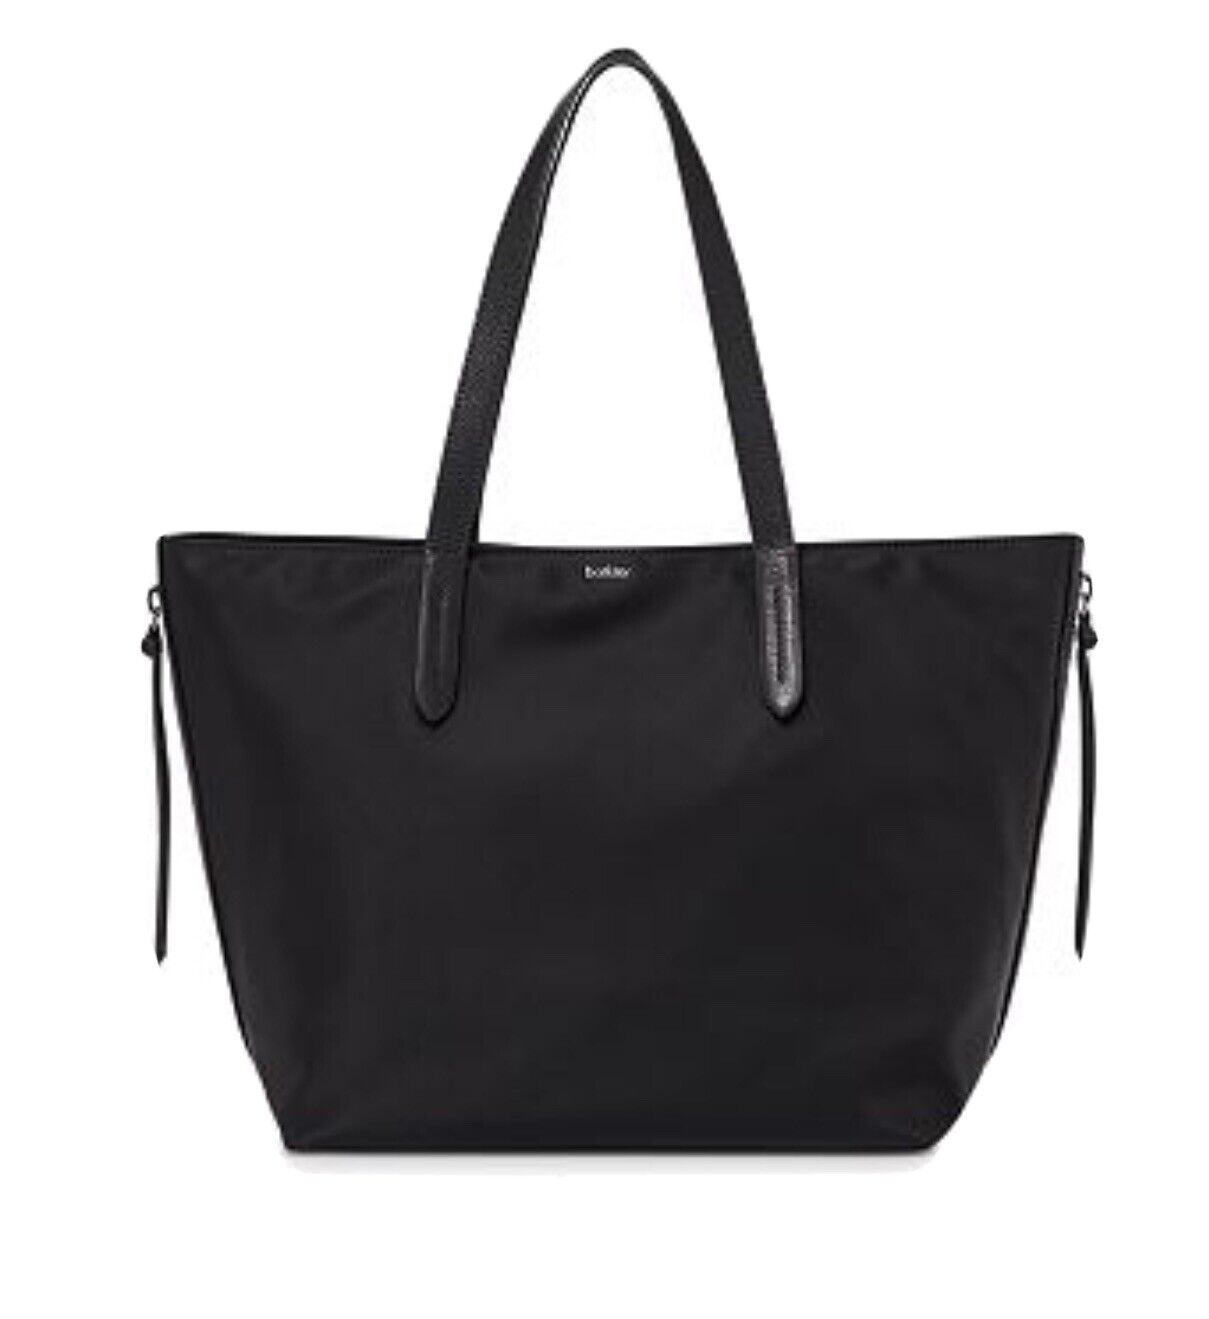 BOTKIER BOND NYLON TOTE (BLACK) BAG, NEW WITH TAGS 